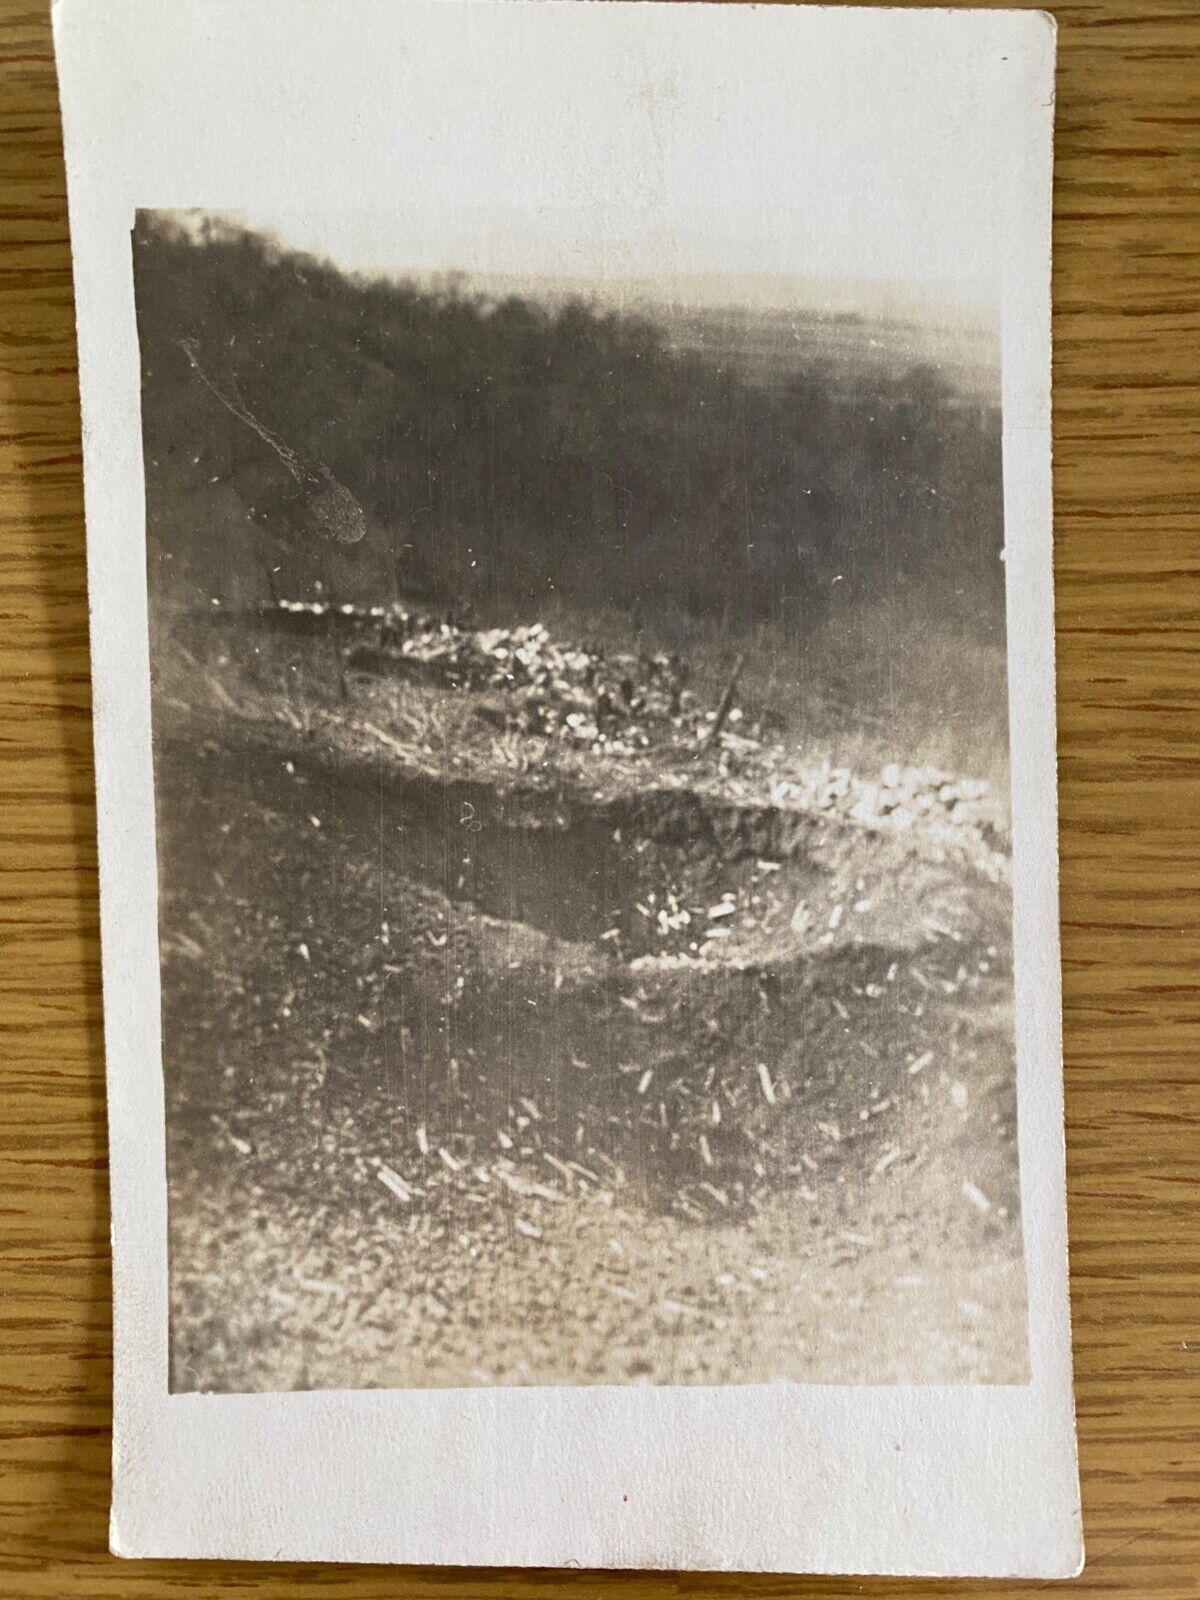 1916 RPPC - WWI ARTILLERY CRATER antique real photo postcard SOMEWHERE IN FRANCE